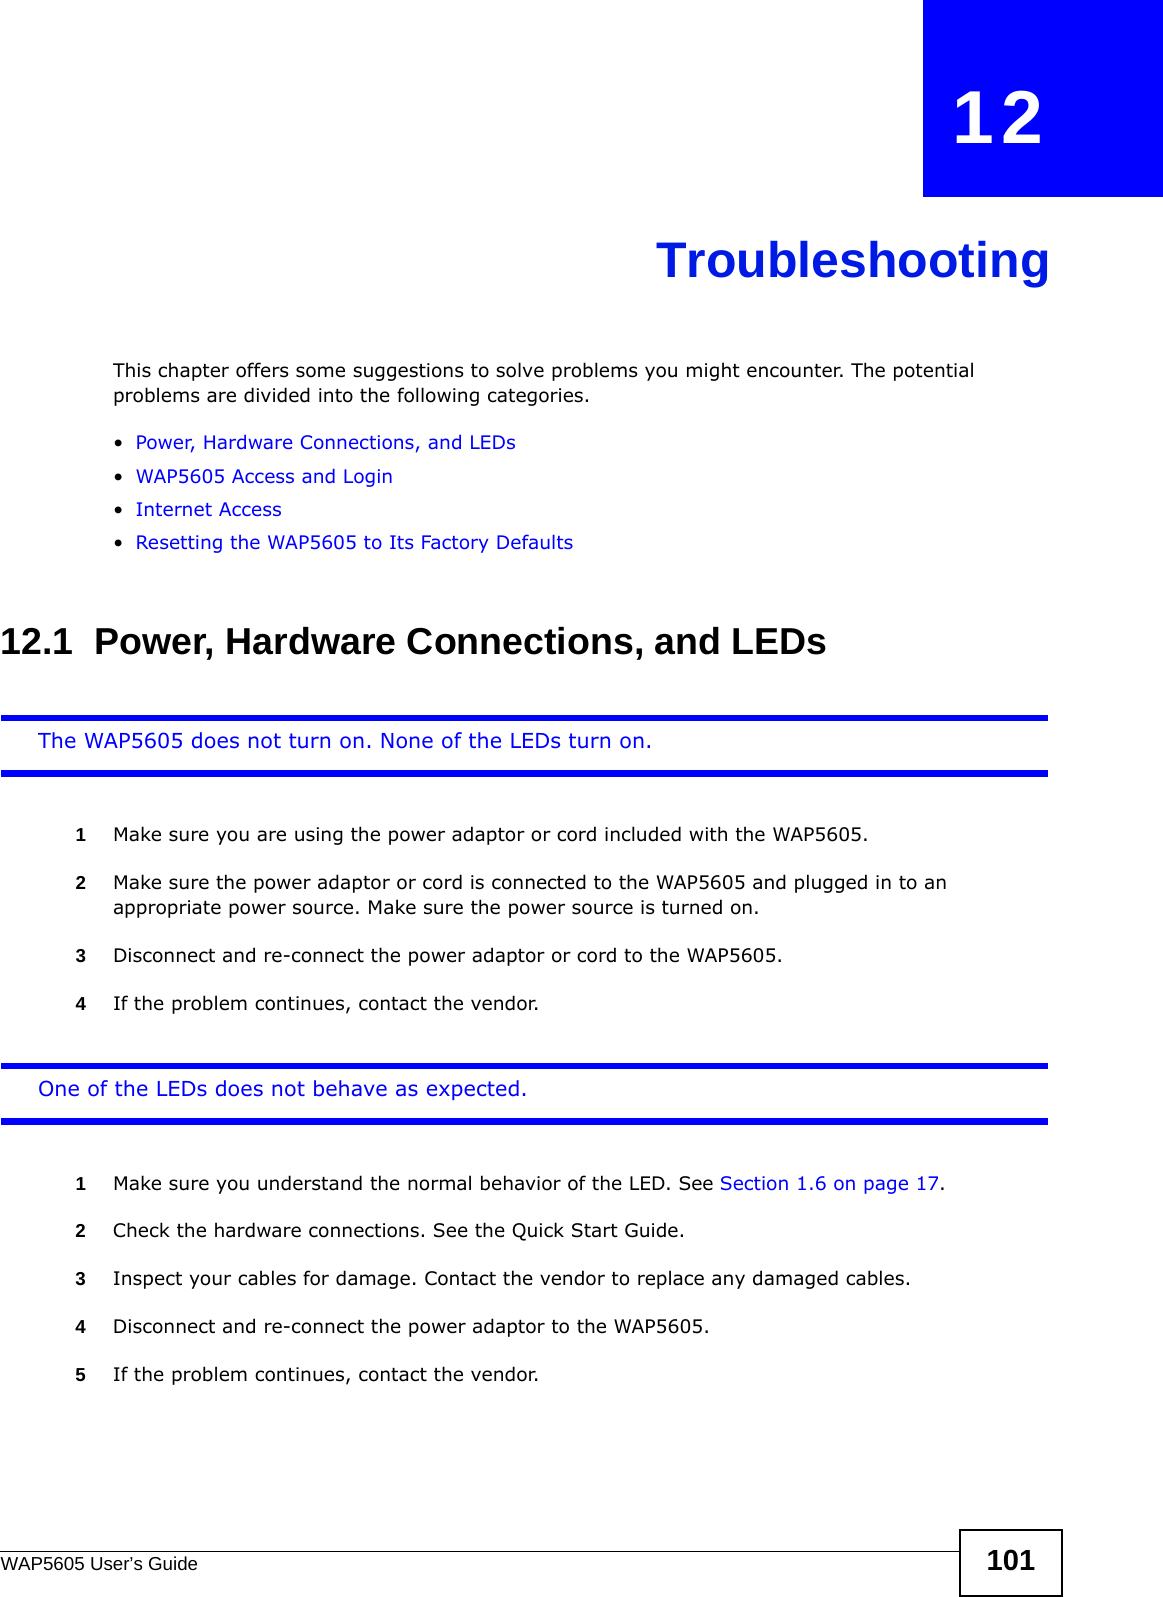 WAP5605 User’s Guide 101CHAPTER   12TroubleshootingThis chapter offers some suggestions to solve problems you might encounter. The potential problems are divided into the following categories. •Power, Hardware Connections, and LEDs•WAP5605 Access and Login•Internet Access•Resetting the WAP5605 to Its Factory Defaults12.1  Power, Hardware Connections, and LEDsThe WAP5605 does not turn on. None of the LEDs turn on.1Make sure you are using the power adaptor or cord included with the WAP5605.2Make sure the power adaptor or cord is connected to the WAP5605 and plugged in to an appropriate power source. Make sure the power source is turned on.3Disconnect and re-connect the power adaptor or cord to the WAP5605.4If the problem continues, contact the vendor.One of the LEDs does not behave as expected.1Make sure you understand the normal behavior of the LED. See Section 1.6 on page 17.2Check the hardware connections. See the Quick Start Guide. 3Inspect your cables for damage. Contact the vendor to replace any damaged cables.4Disconnect and re-connect the power adaptor to the WAP5605. 5If the problem continues, contact the vendor.